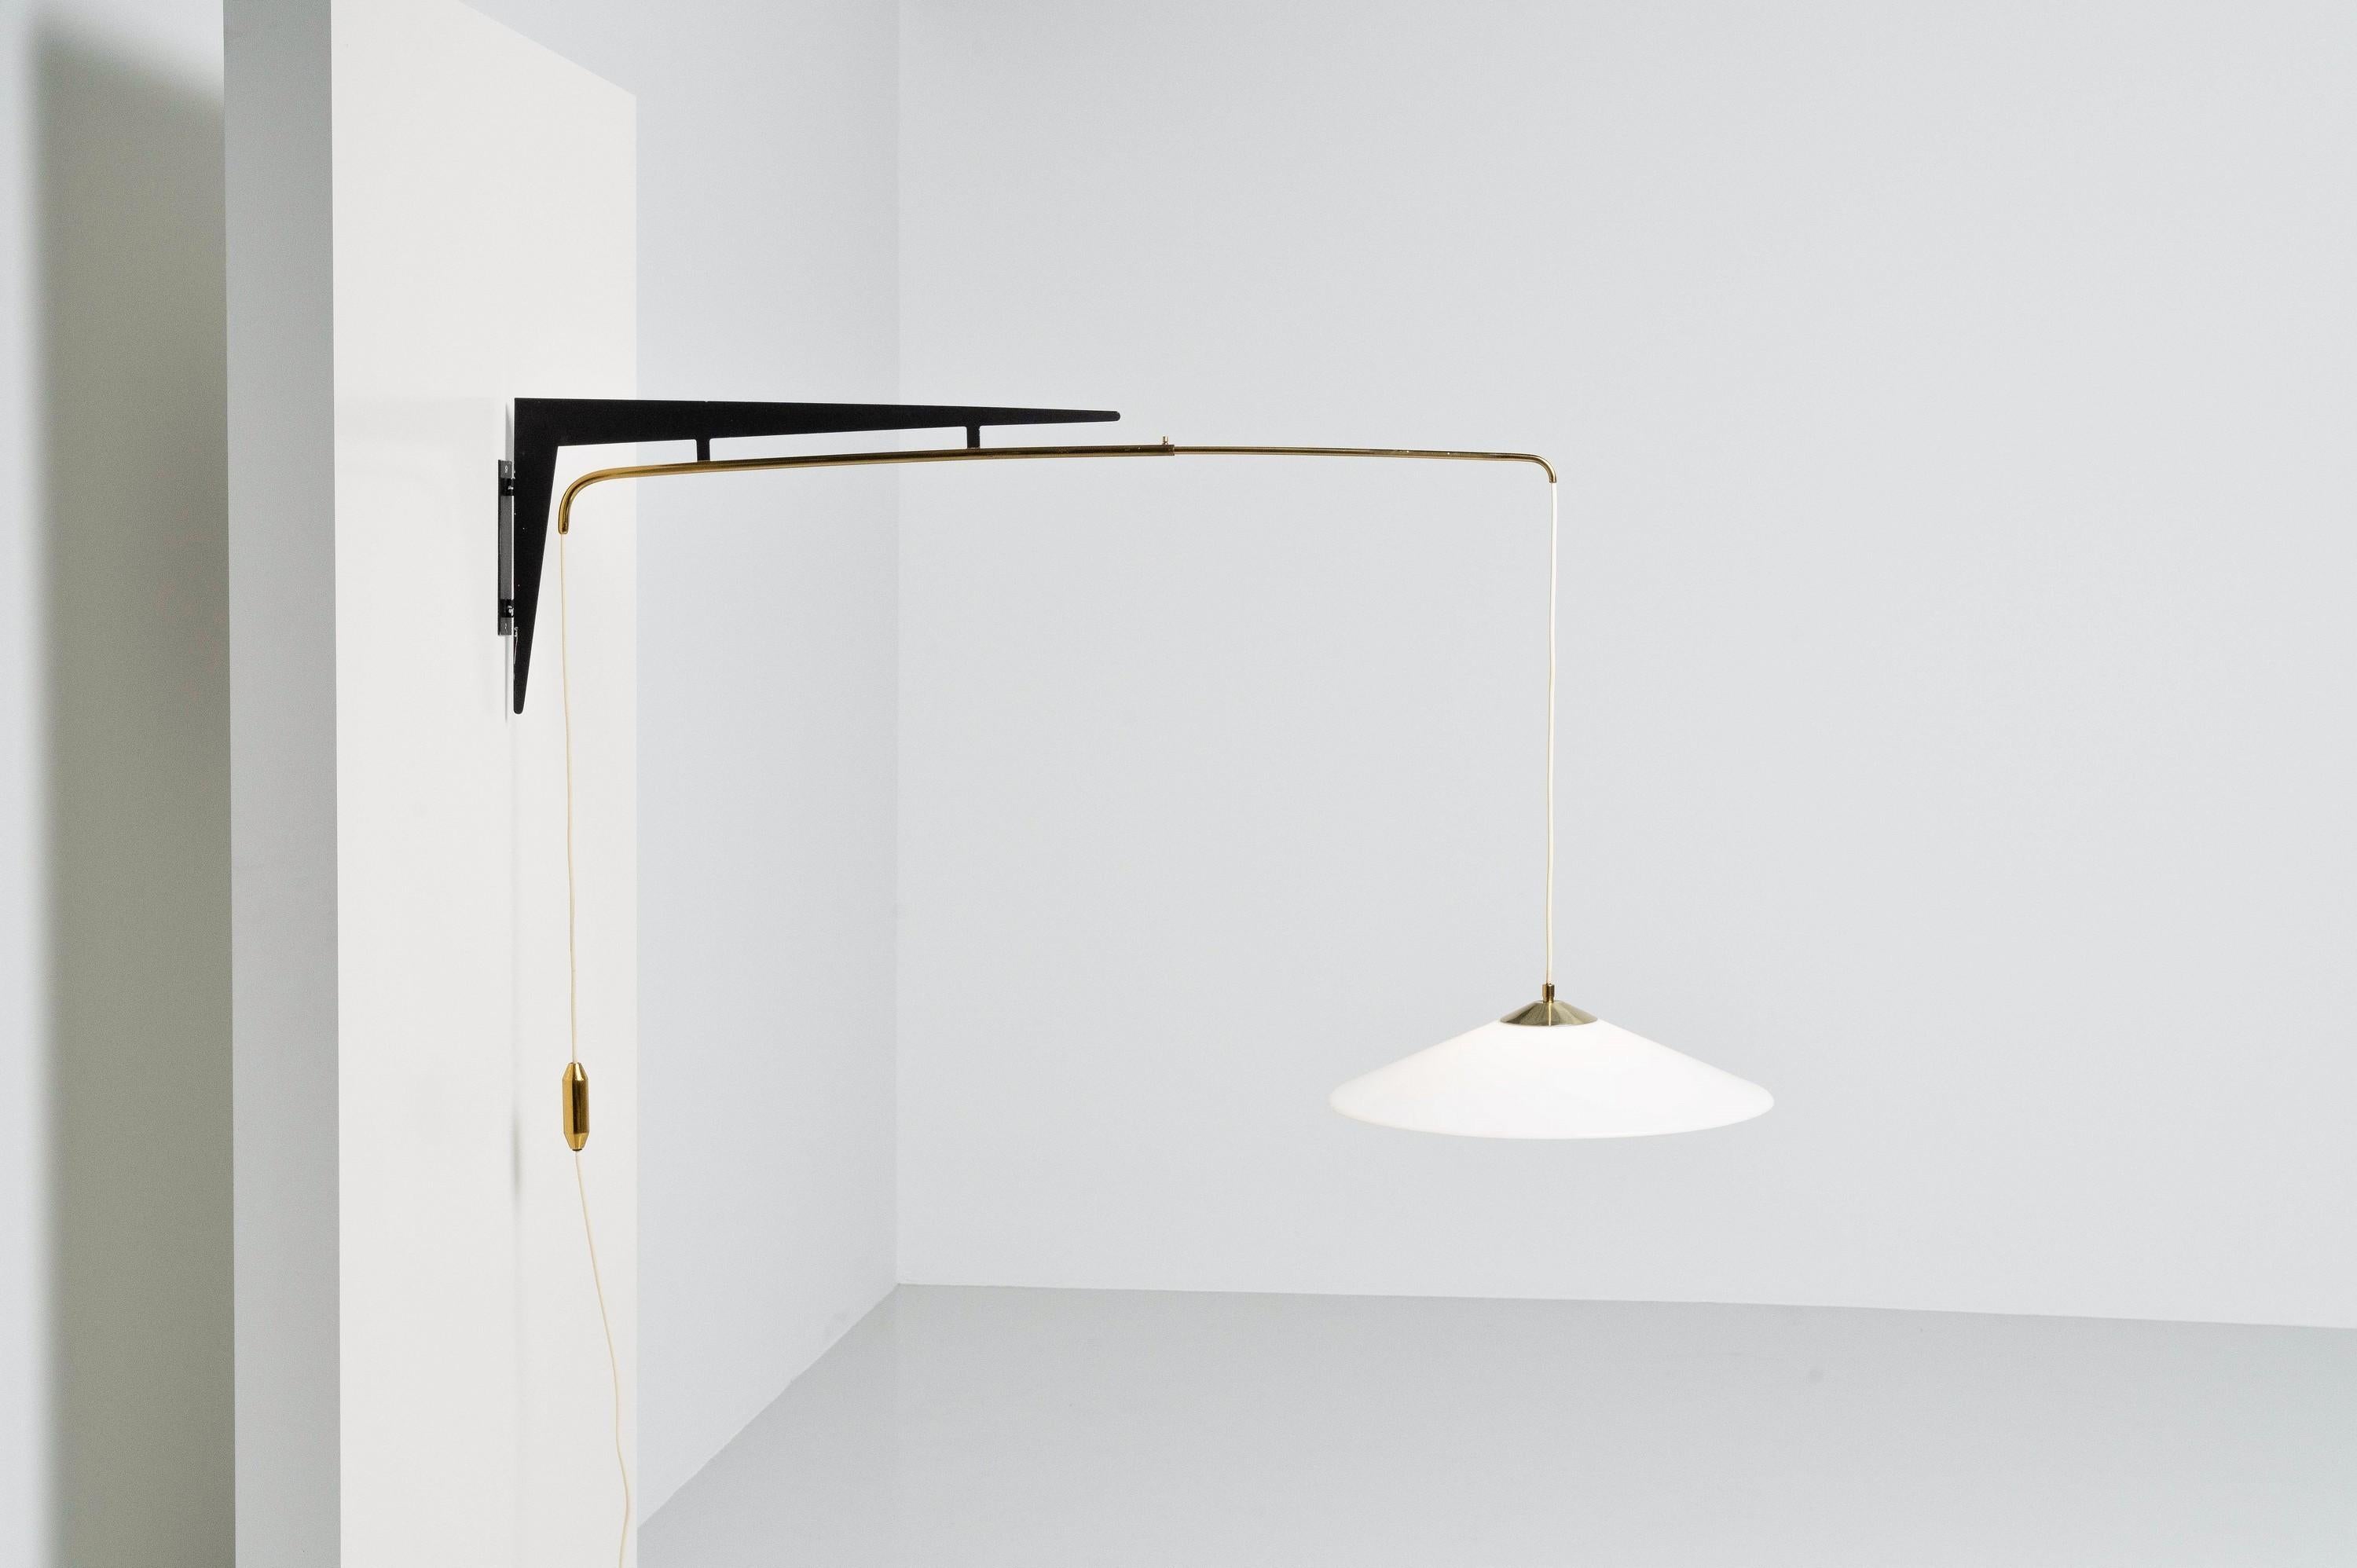 Very clean looking adjustable wall lamp made by Stilux in Italy in 1960. This wall mounted lamp has a small brass counterweight, and can be easily swinged sideways. The fixture itself containing two brass rods can be adjusted and fastened as one